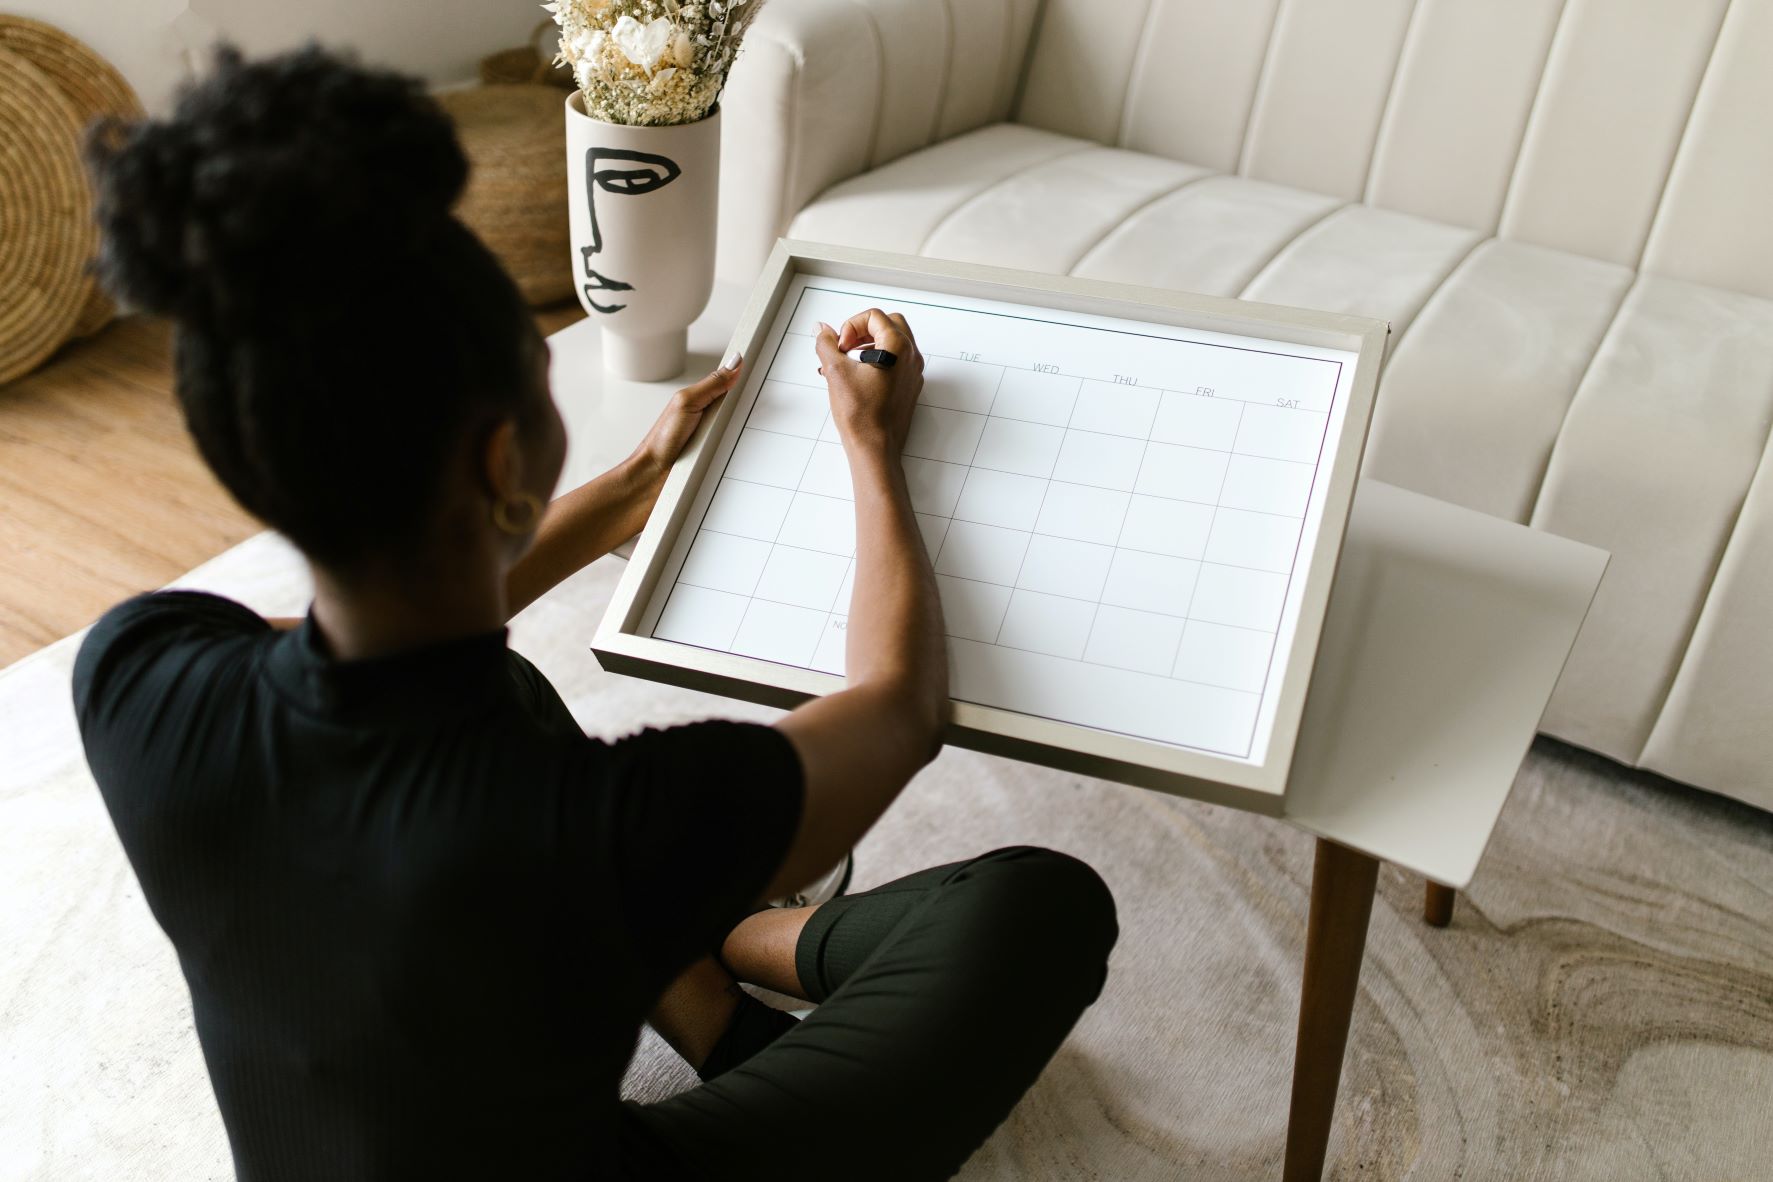 A brown-skinned woman is sitting on the floor, writing on a whiteboard calendar. Her hair is up in a curly bun.